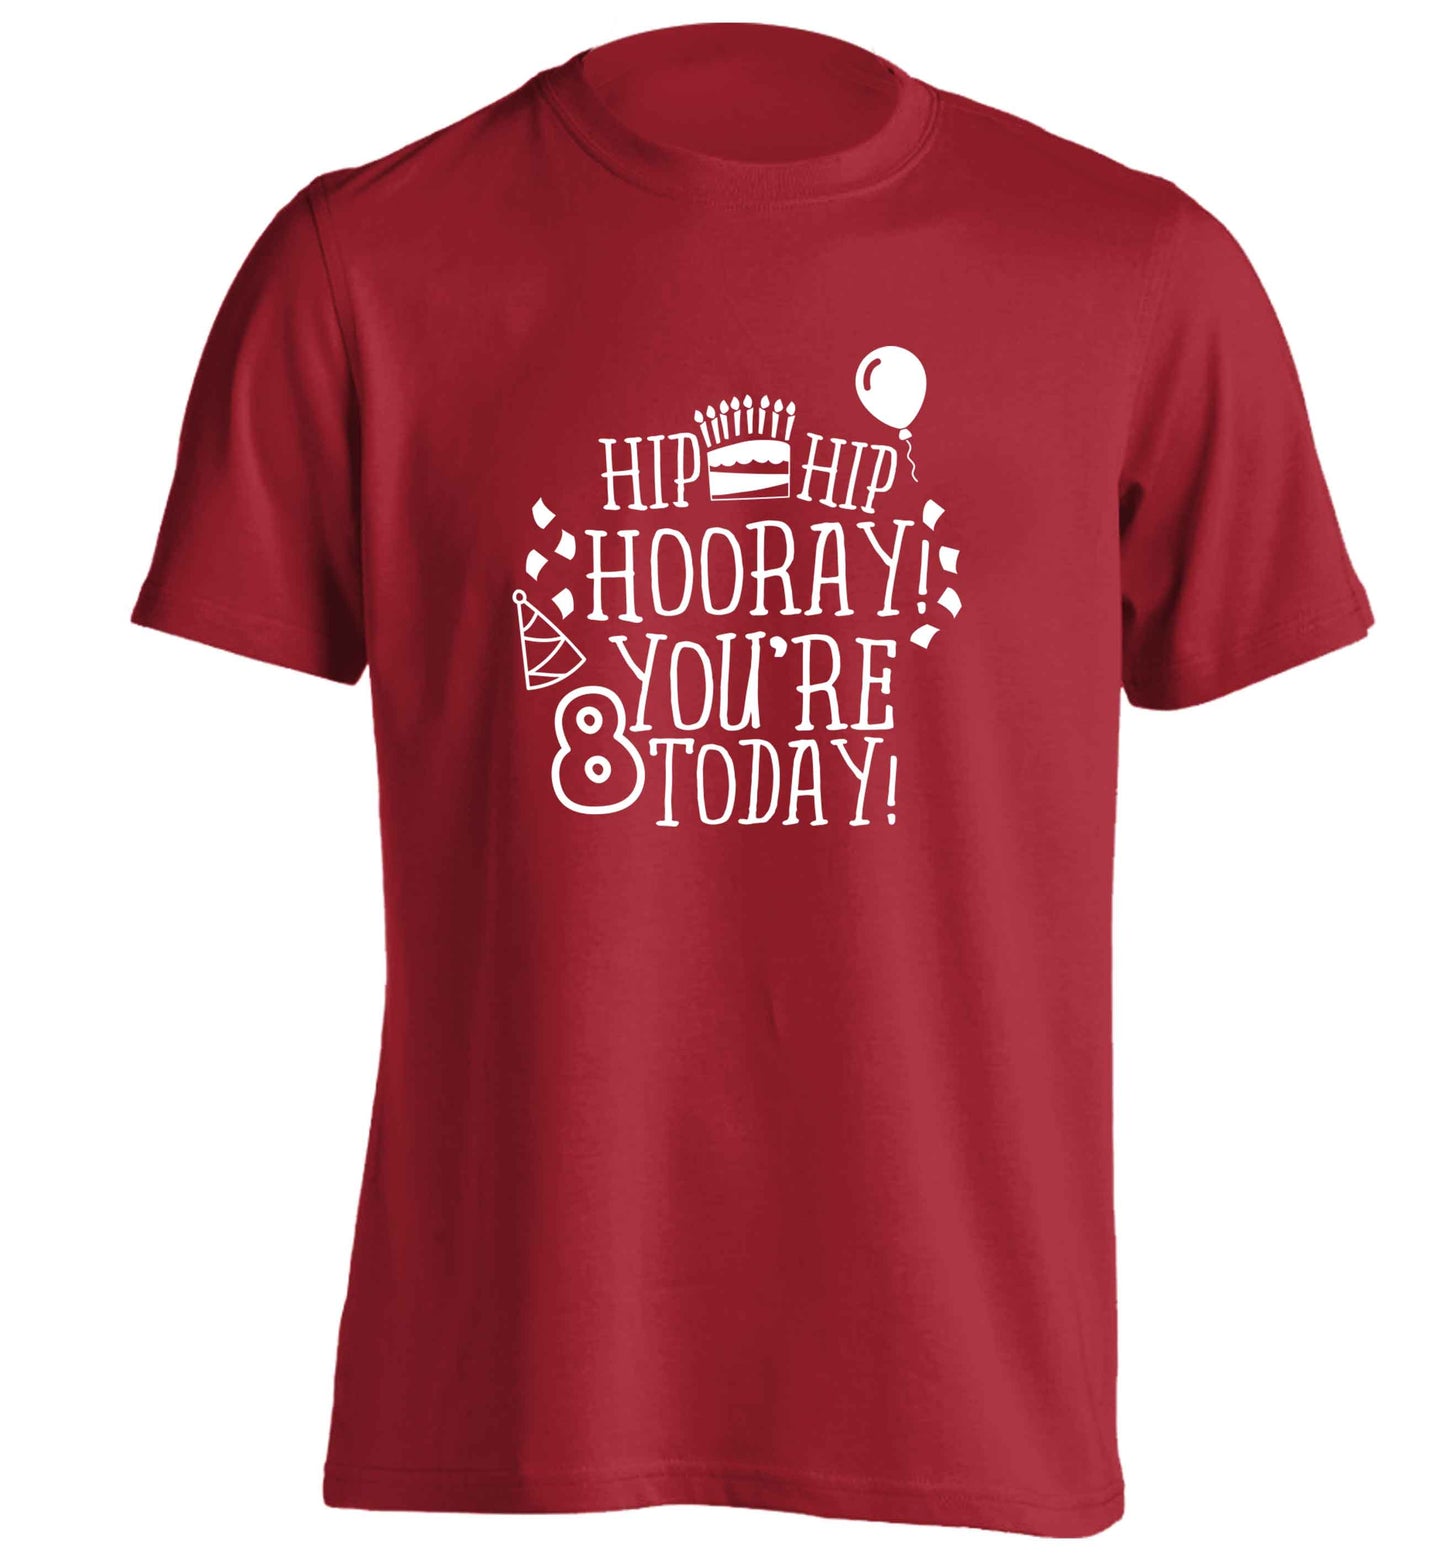 Hip hip hooray you're 8 today! adults unisex red Tshirt 2XL